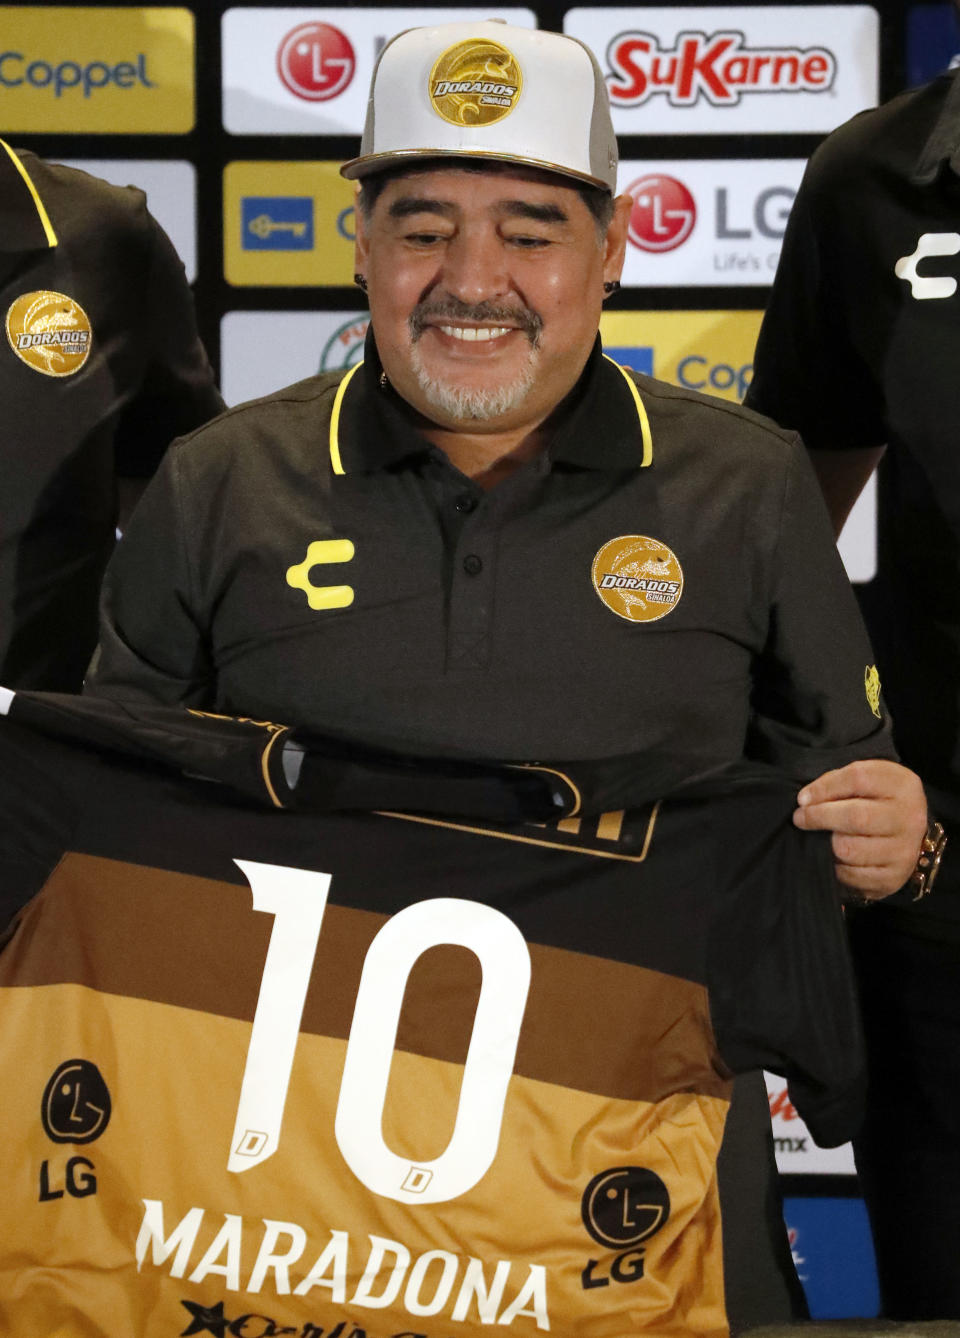 Former soccer great Diego Maradona, shows his team jersey during a press conference where he was presented as the new manager of the Dorados of Sinaloa, in Culiacan, Mexico, Monday, Sept. 10, 2018. Maradona, whose public battles with cocaine made him soccer's poster child for the perils of substance abuse, is setting up camp in Mexico's drug cartel heartland as the new coach of a second-tier team. (AP Photo/Marco Ugarte)